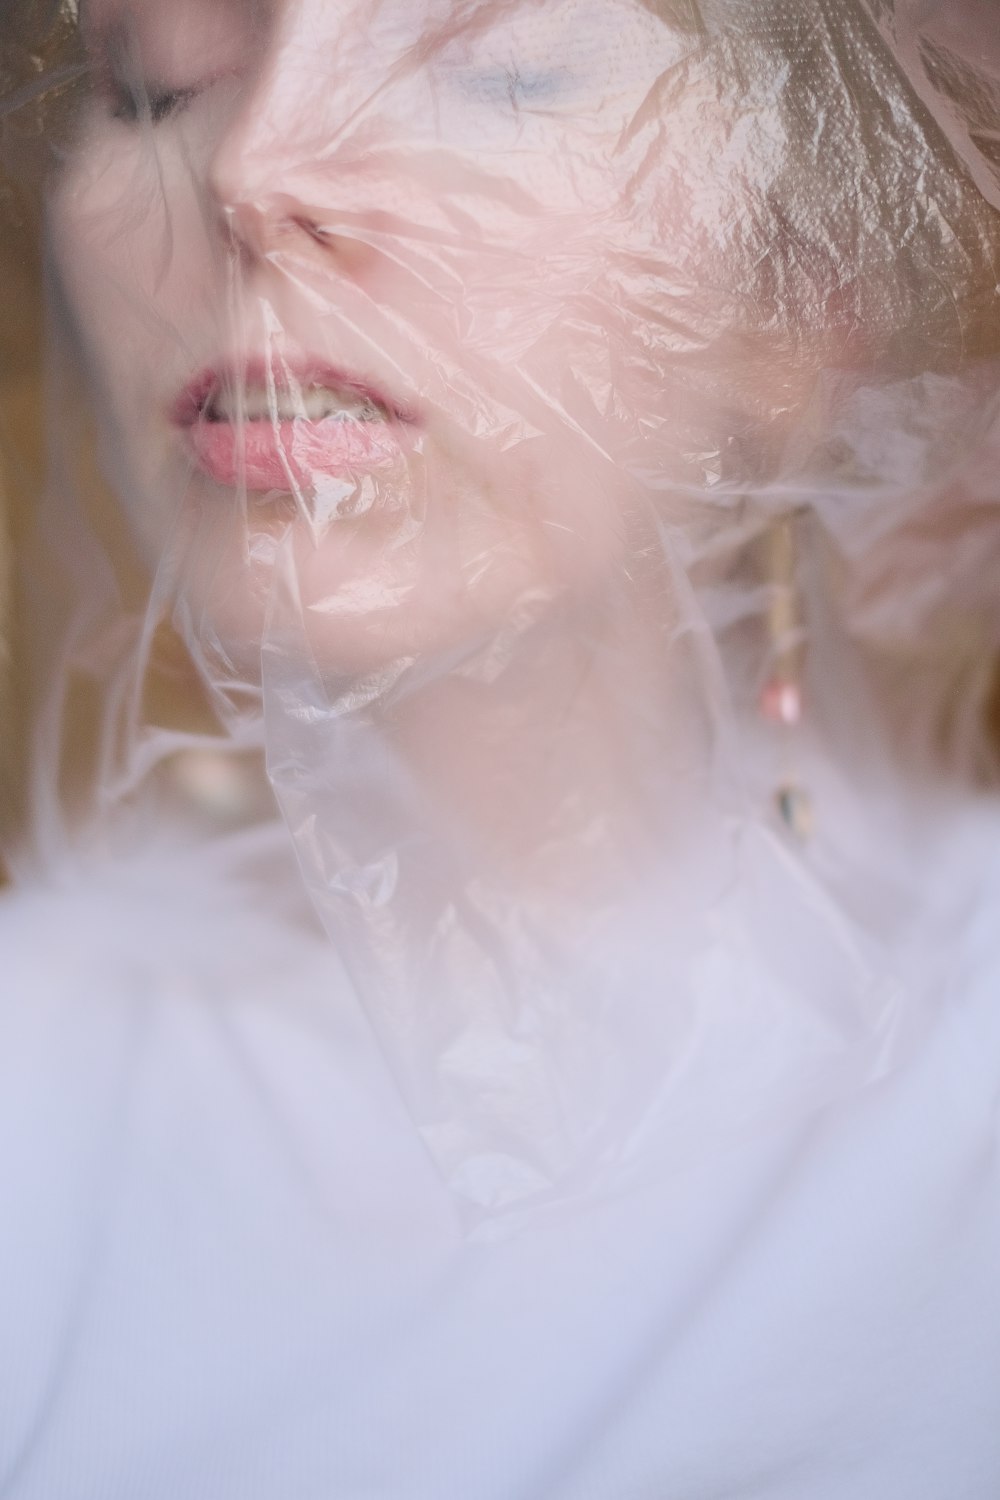 a woman wearing a plastic wrap around her face